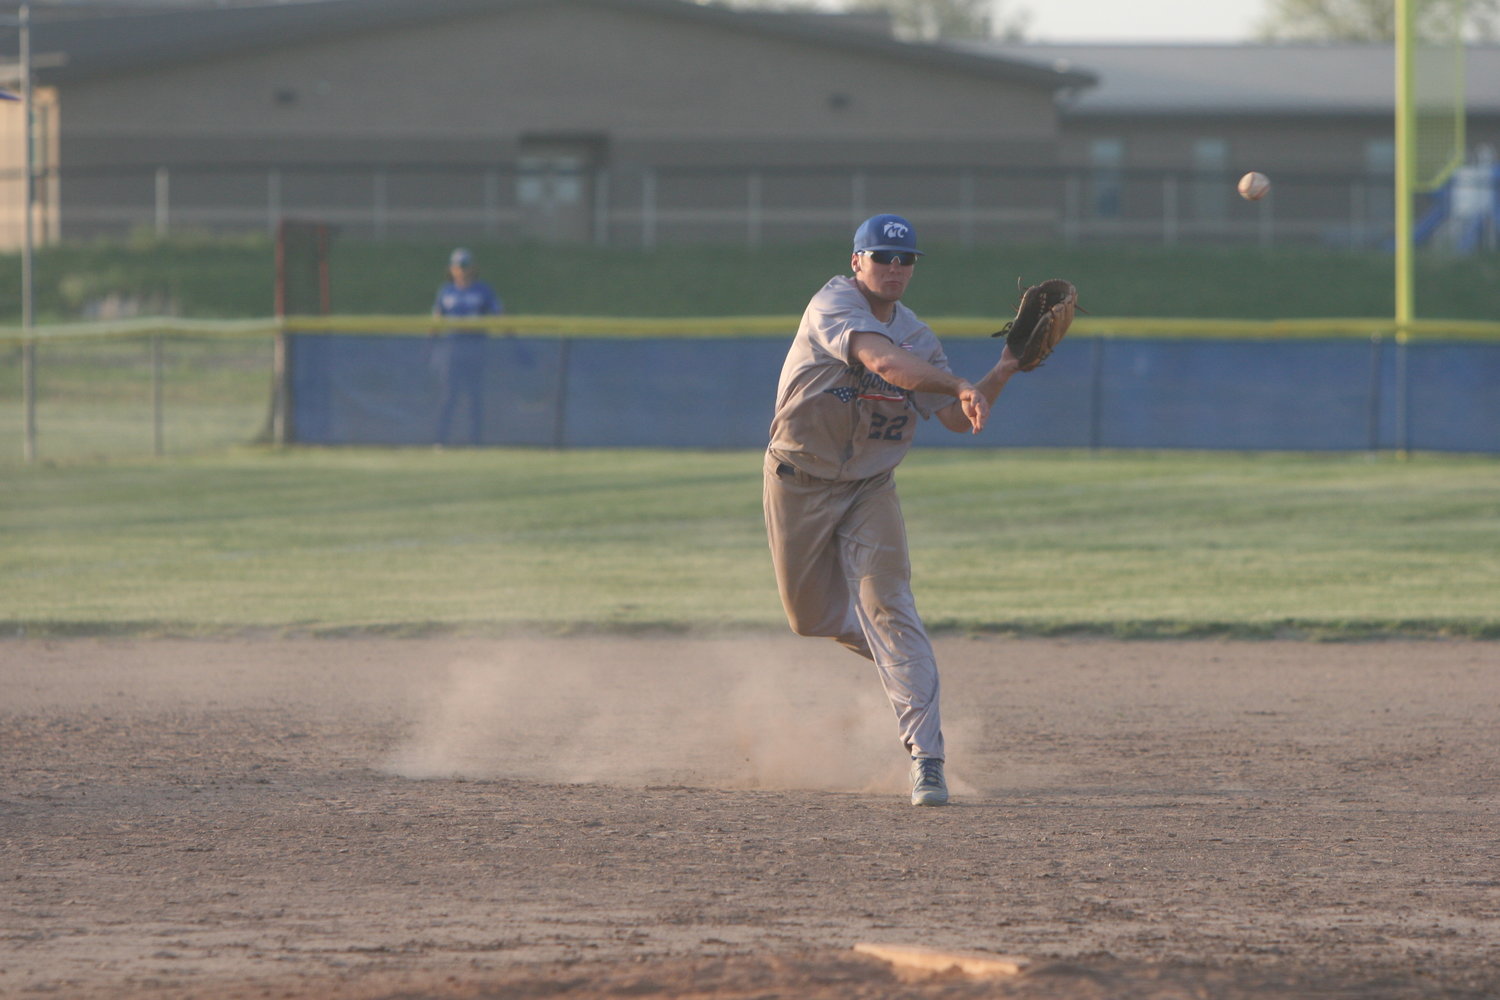 Montgomery County junior Jace Ellis makes a play from third base against Mark Twain last year. Ellis was one of four MCHS players who were named to the all-state team in 2022.